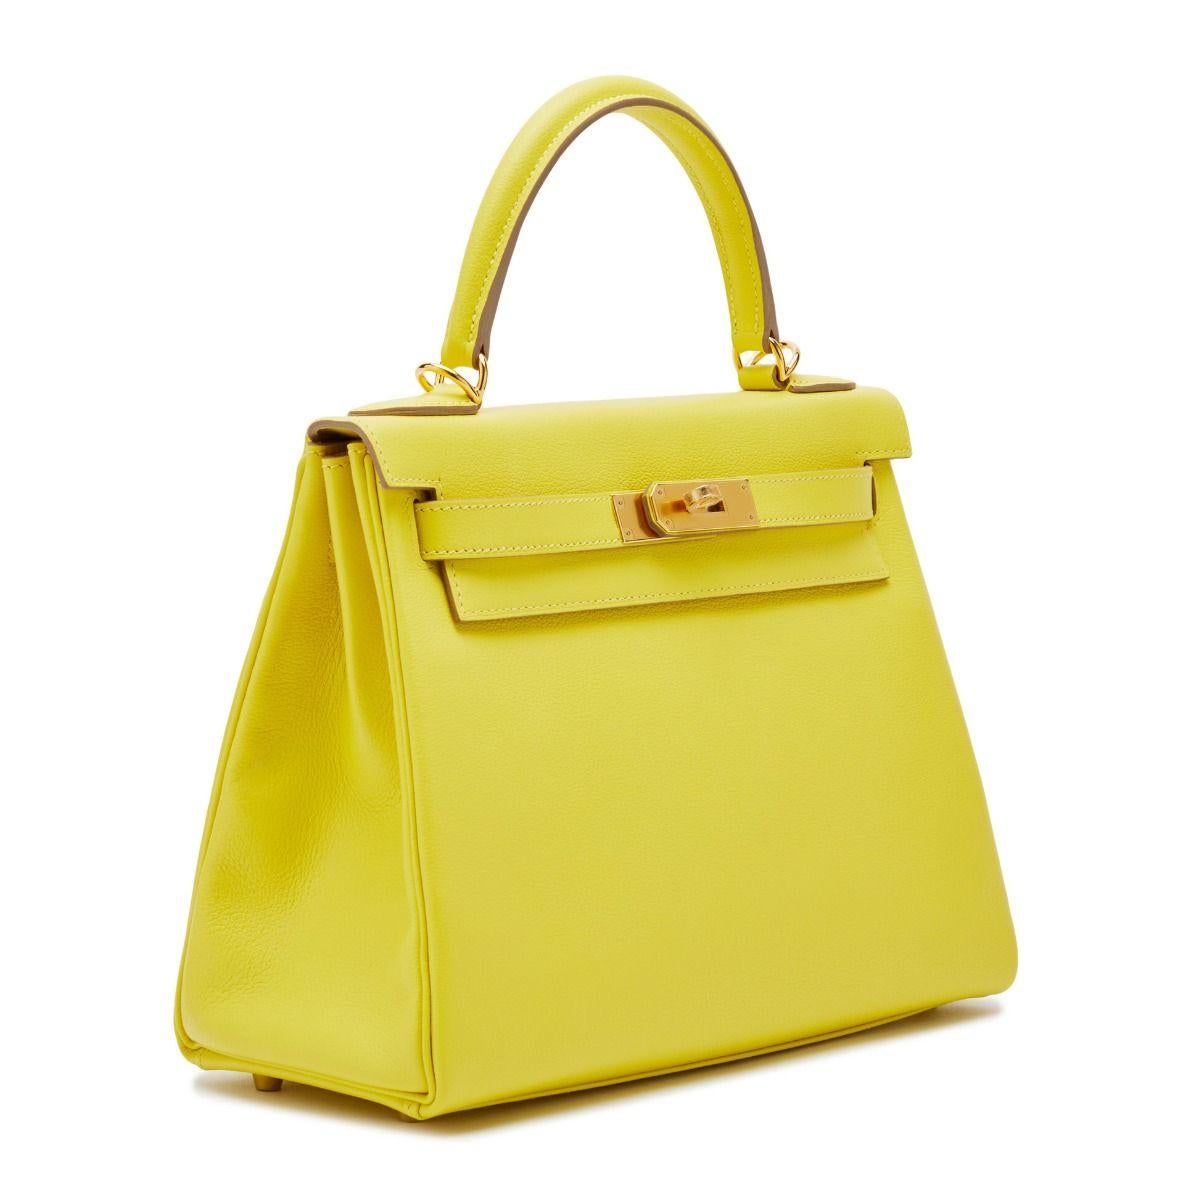 This Hermès Kelly 28 exudes opulence, crafted from a tropical shade Lime, lined in a complementary vibrant-toned goatskin and finished with gold hardware. Compact-sized, the handbag's interior holds a zipped pocket and an open pocket, making it as